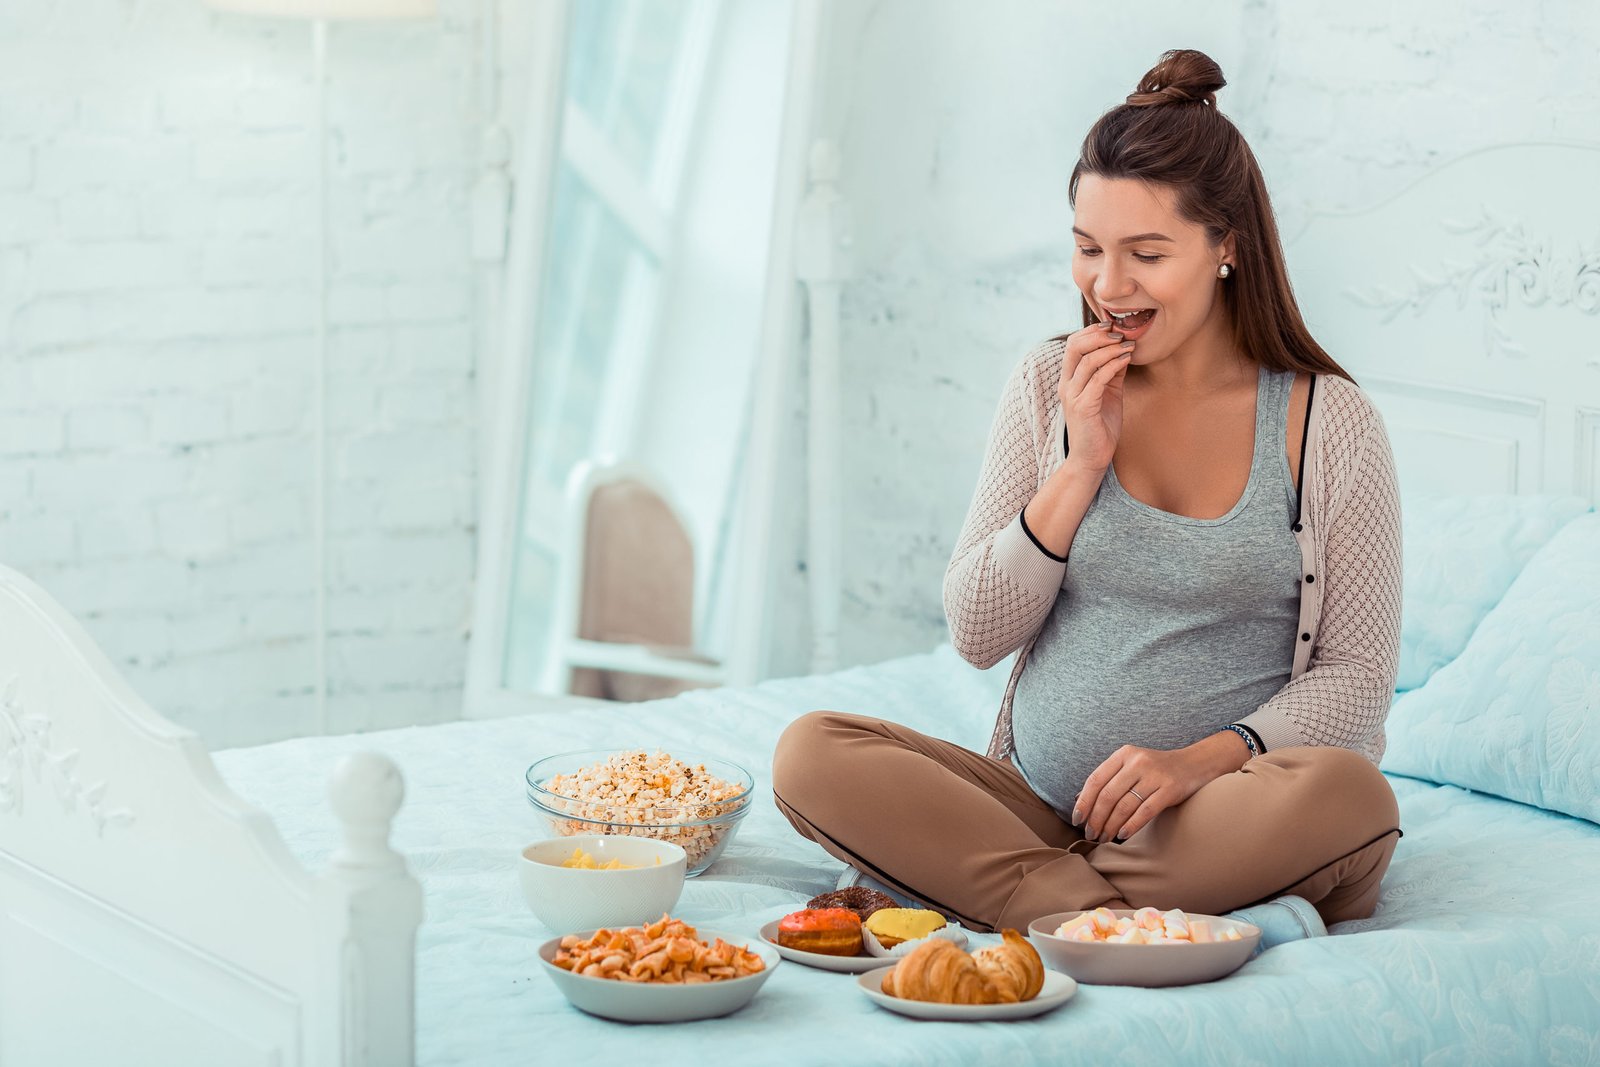 Pregnant & Hungry? Top Foods for Moms-to-Be